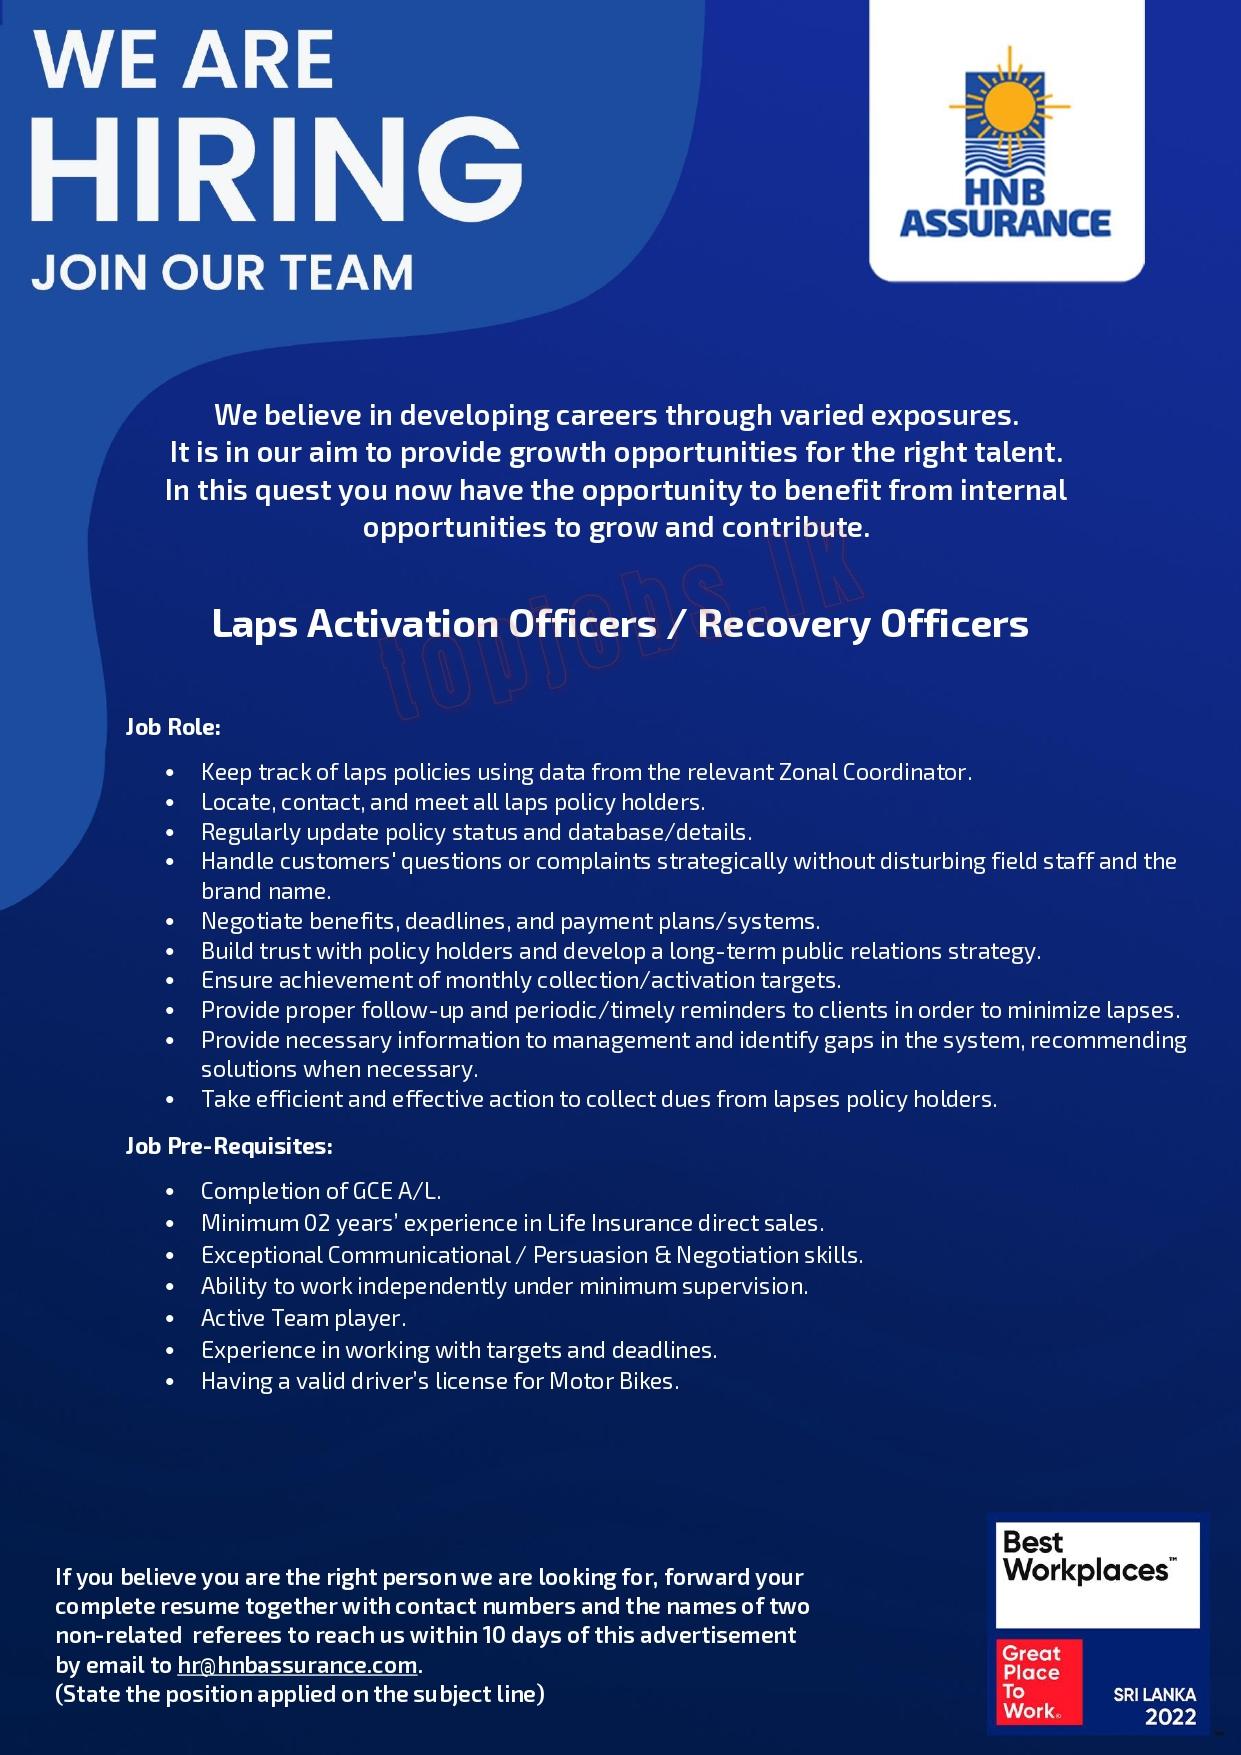 Laps Activation Officers / Recovery Officer